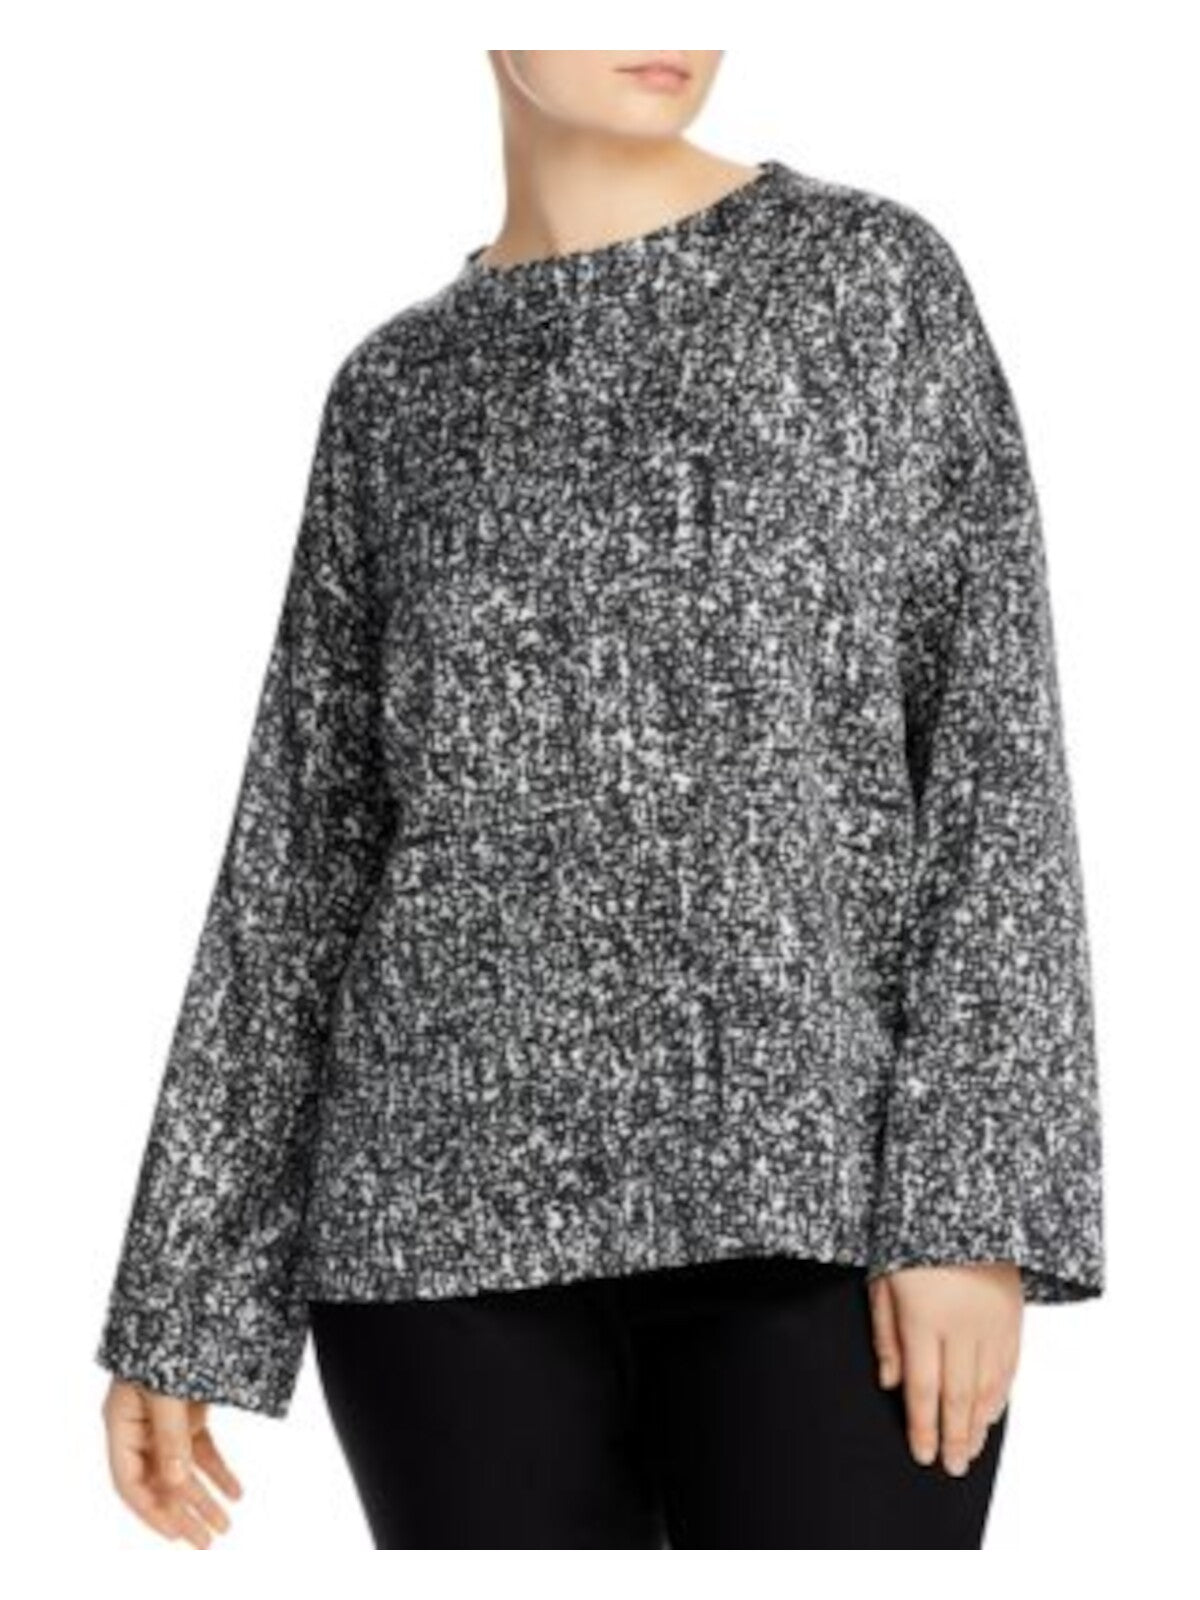 EILEEN FISHER Womens Black Printed Long Sleeve V Neck Wear To Work Blouse M